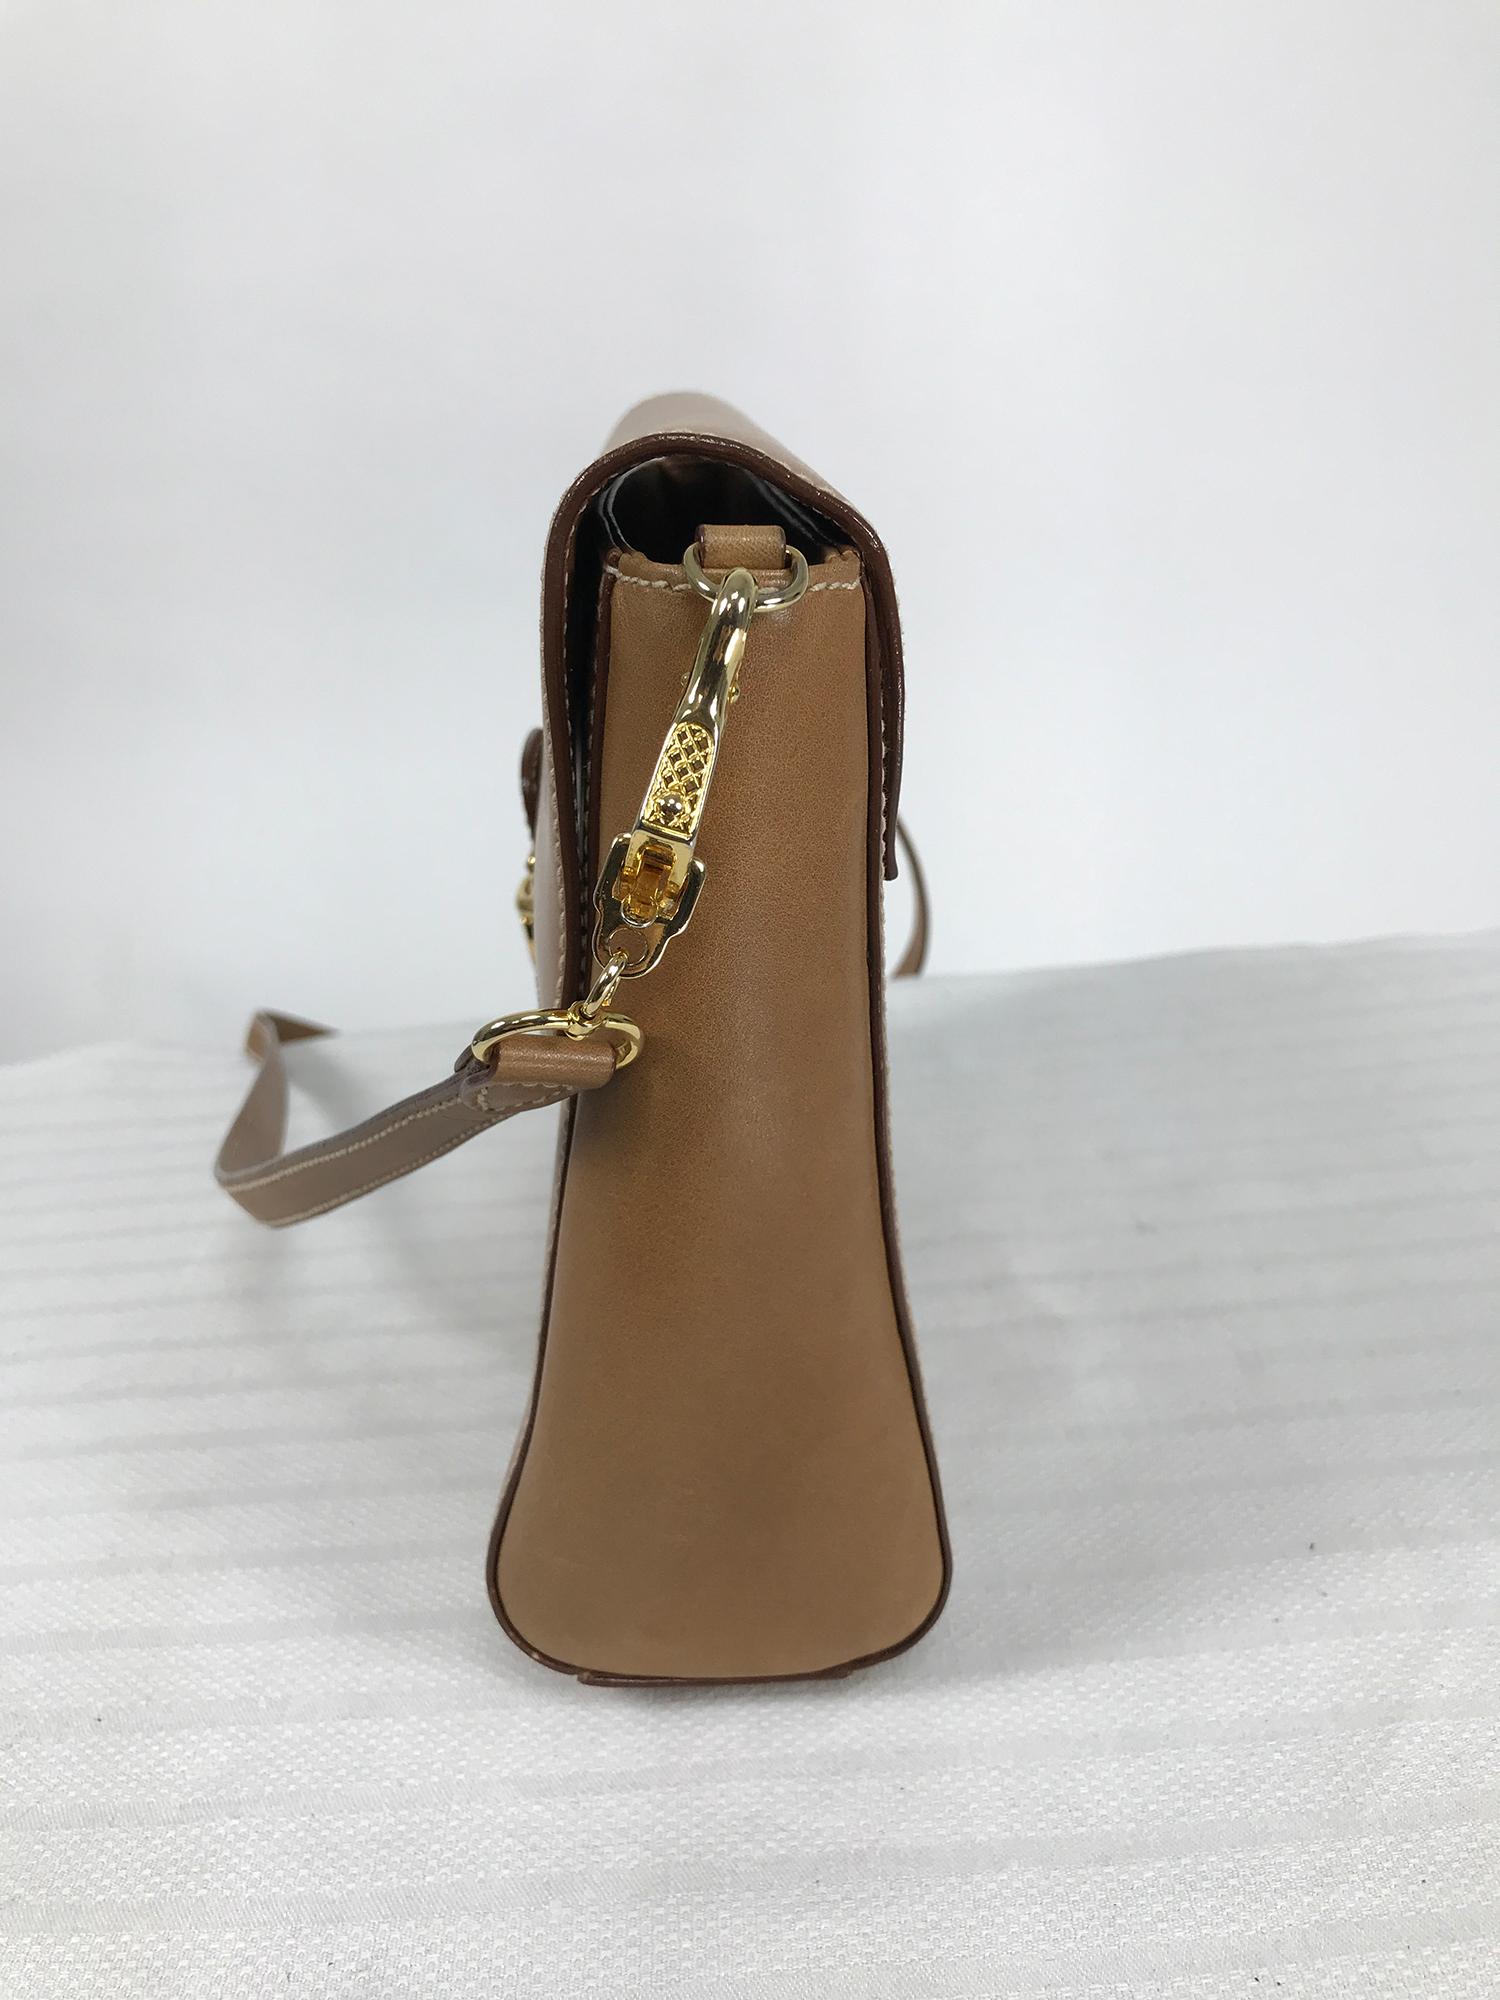 Prada Flap Front Saddle Tan Leather Shoulder Bag Gold Hardware In Good Condition In West Palm Beach, FL